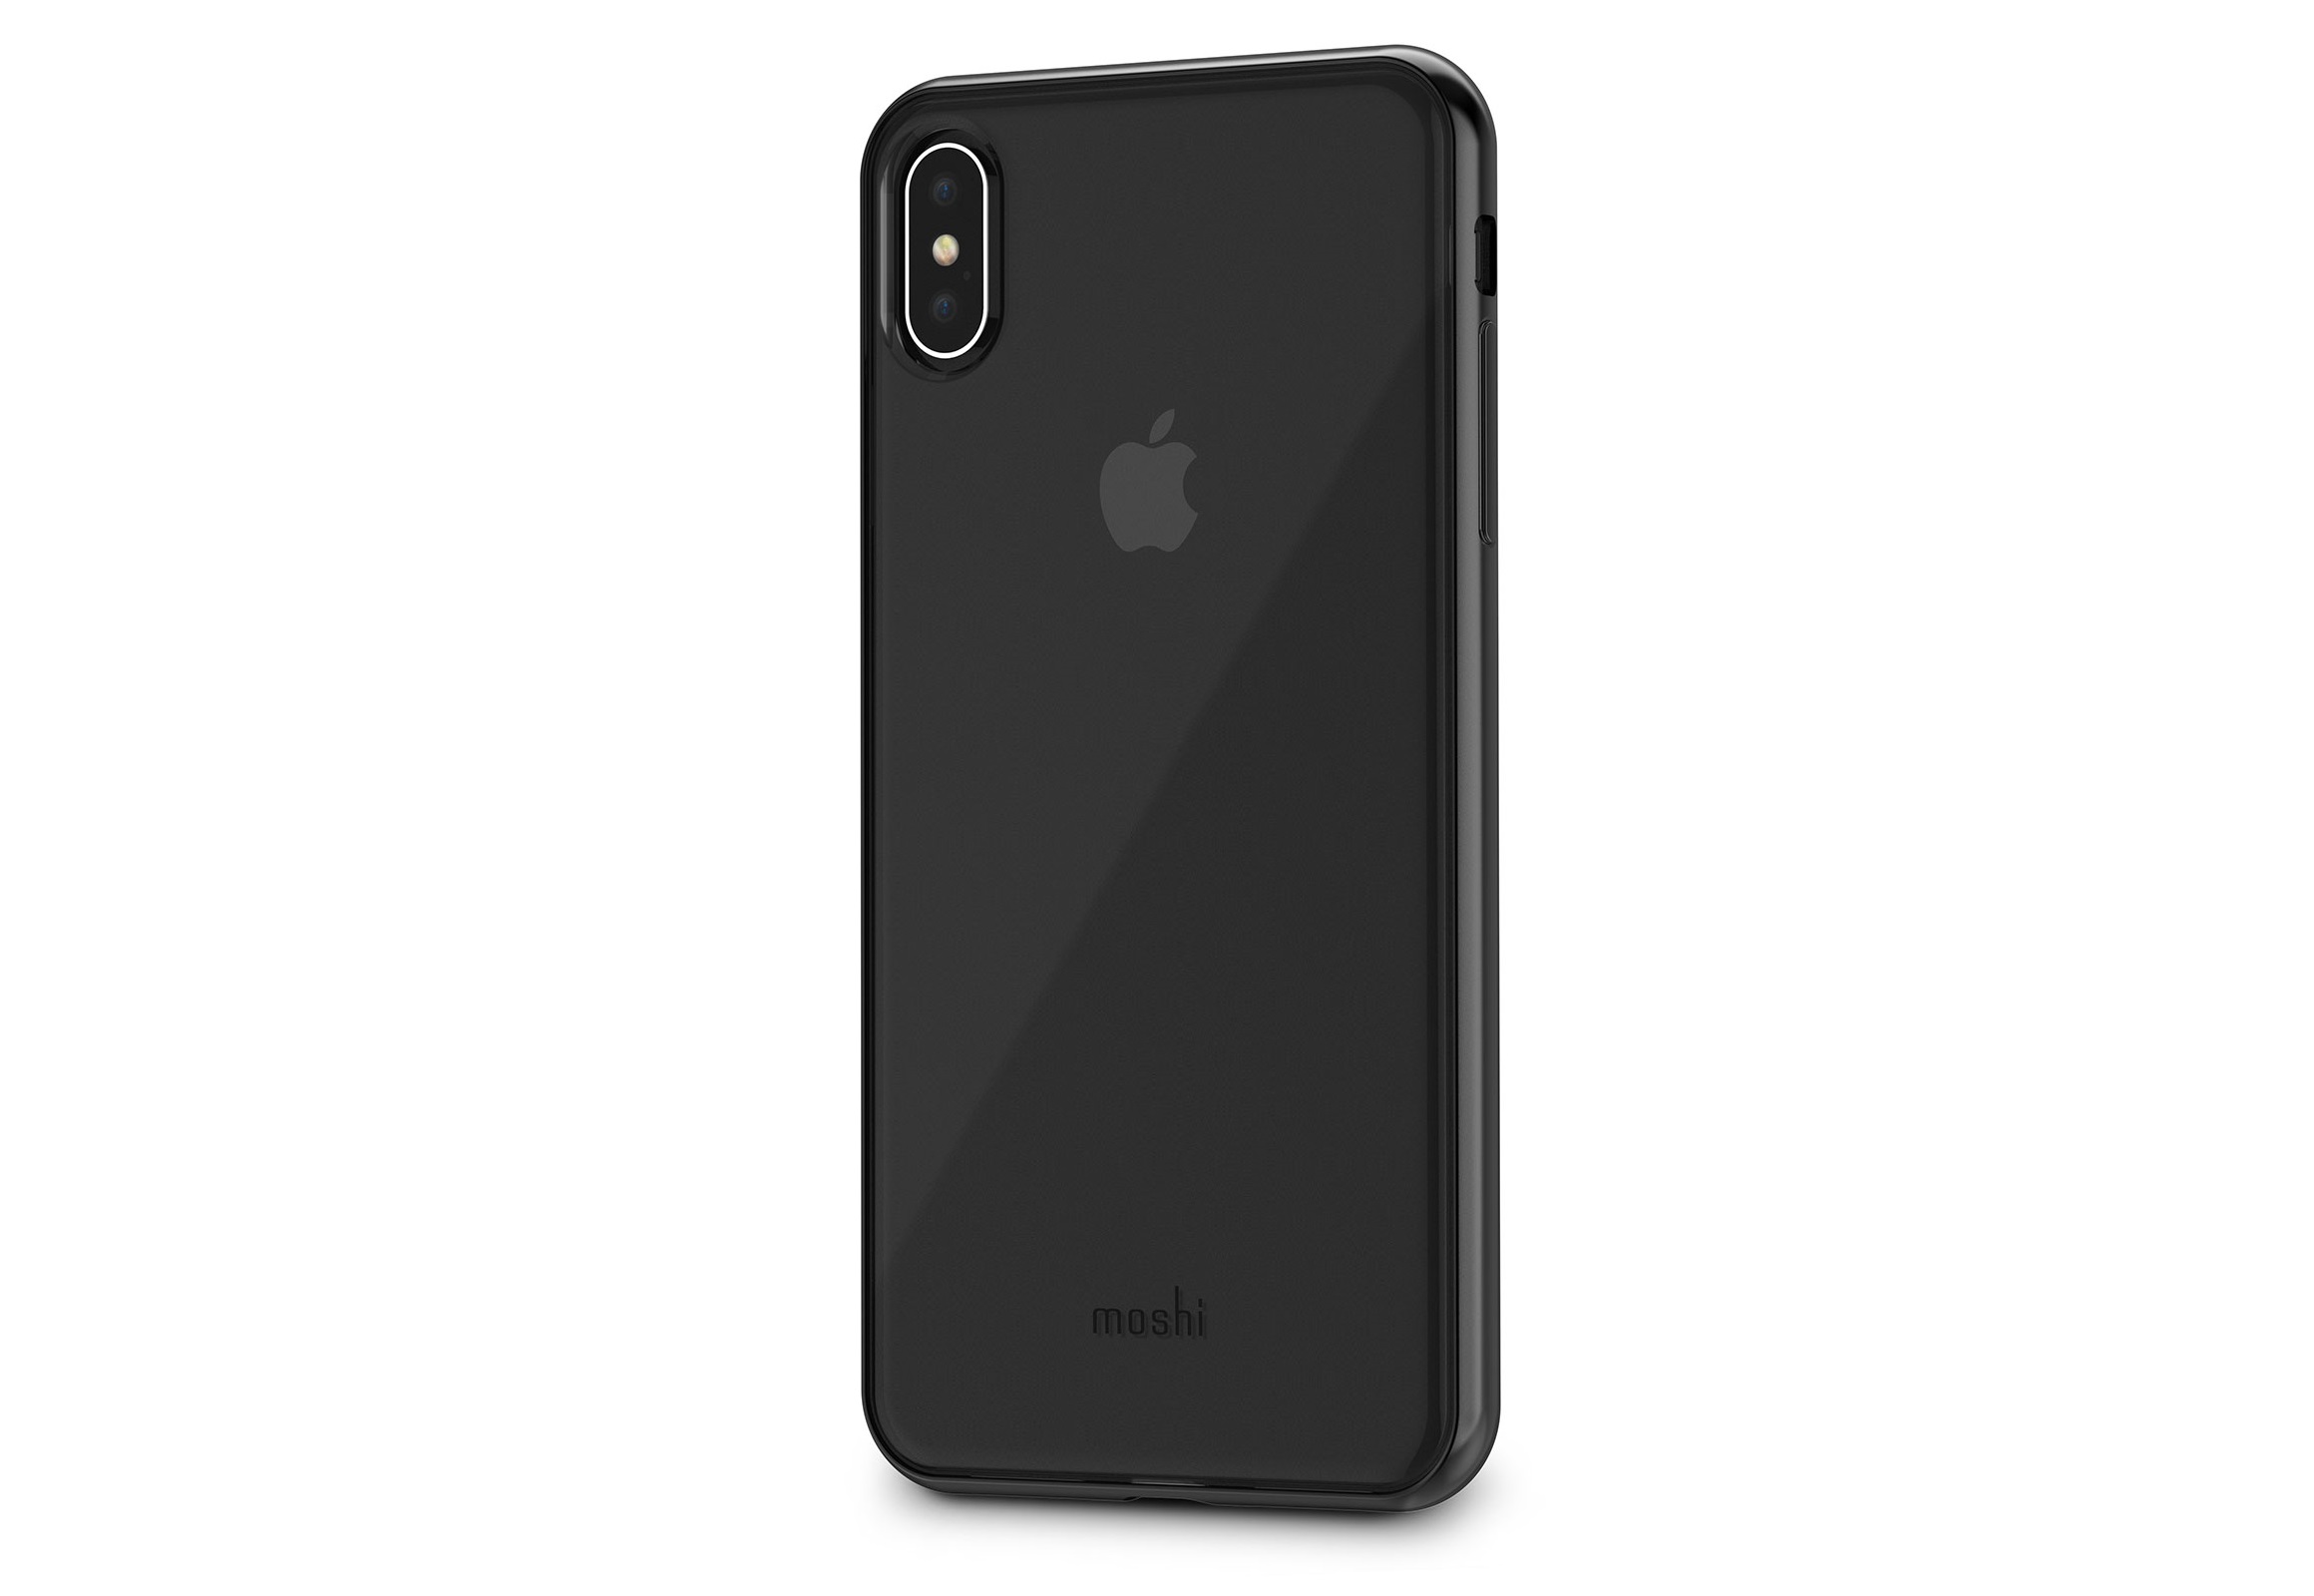 Iphone XS 256 GB Space Gray